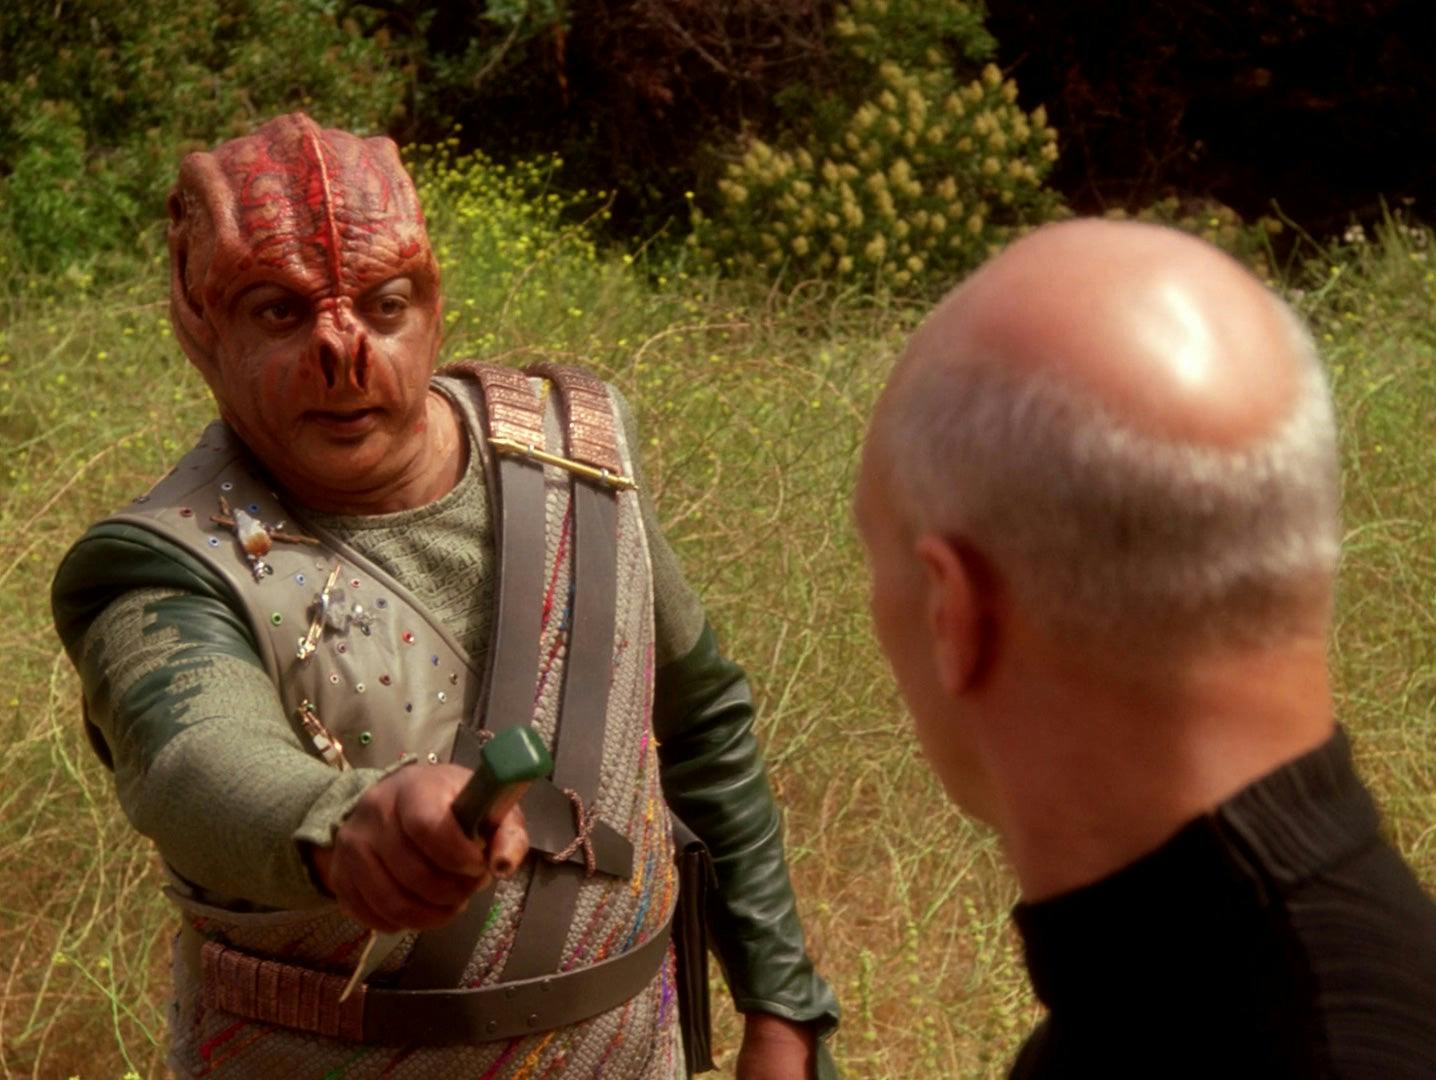 On the surface of El-Adrel IV, Captain Dathon hands his dagger-like weapon to Picard in 'Darmok'